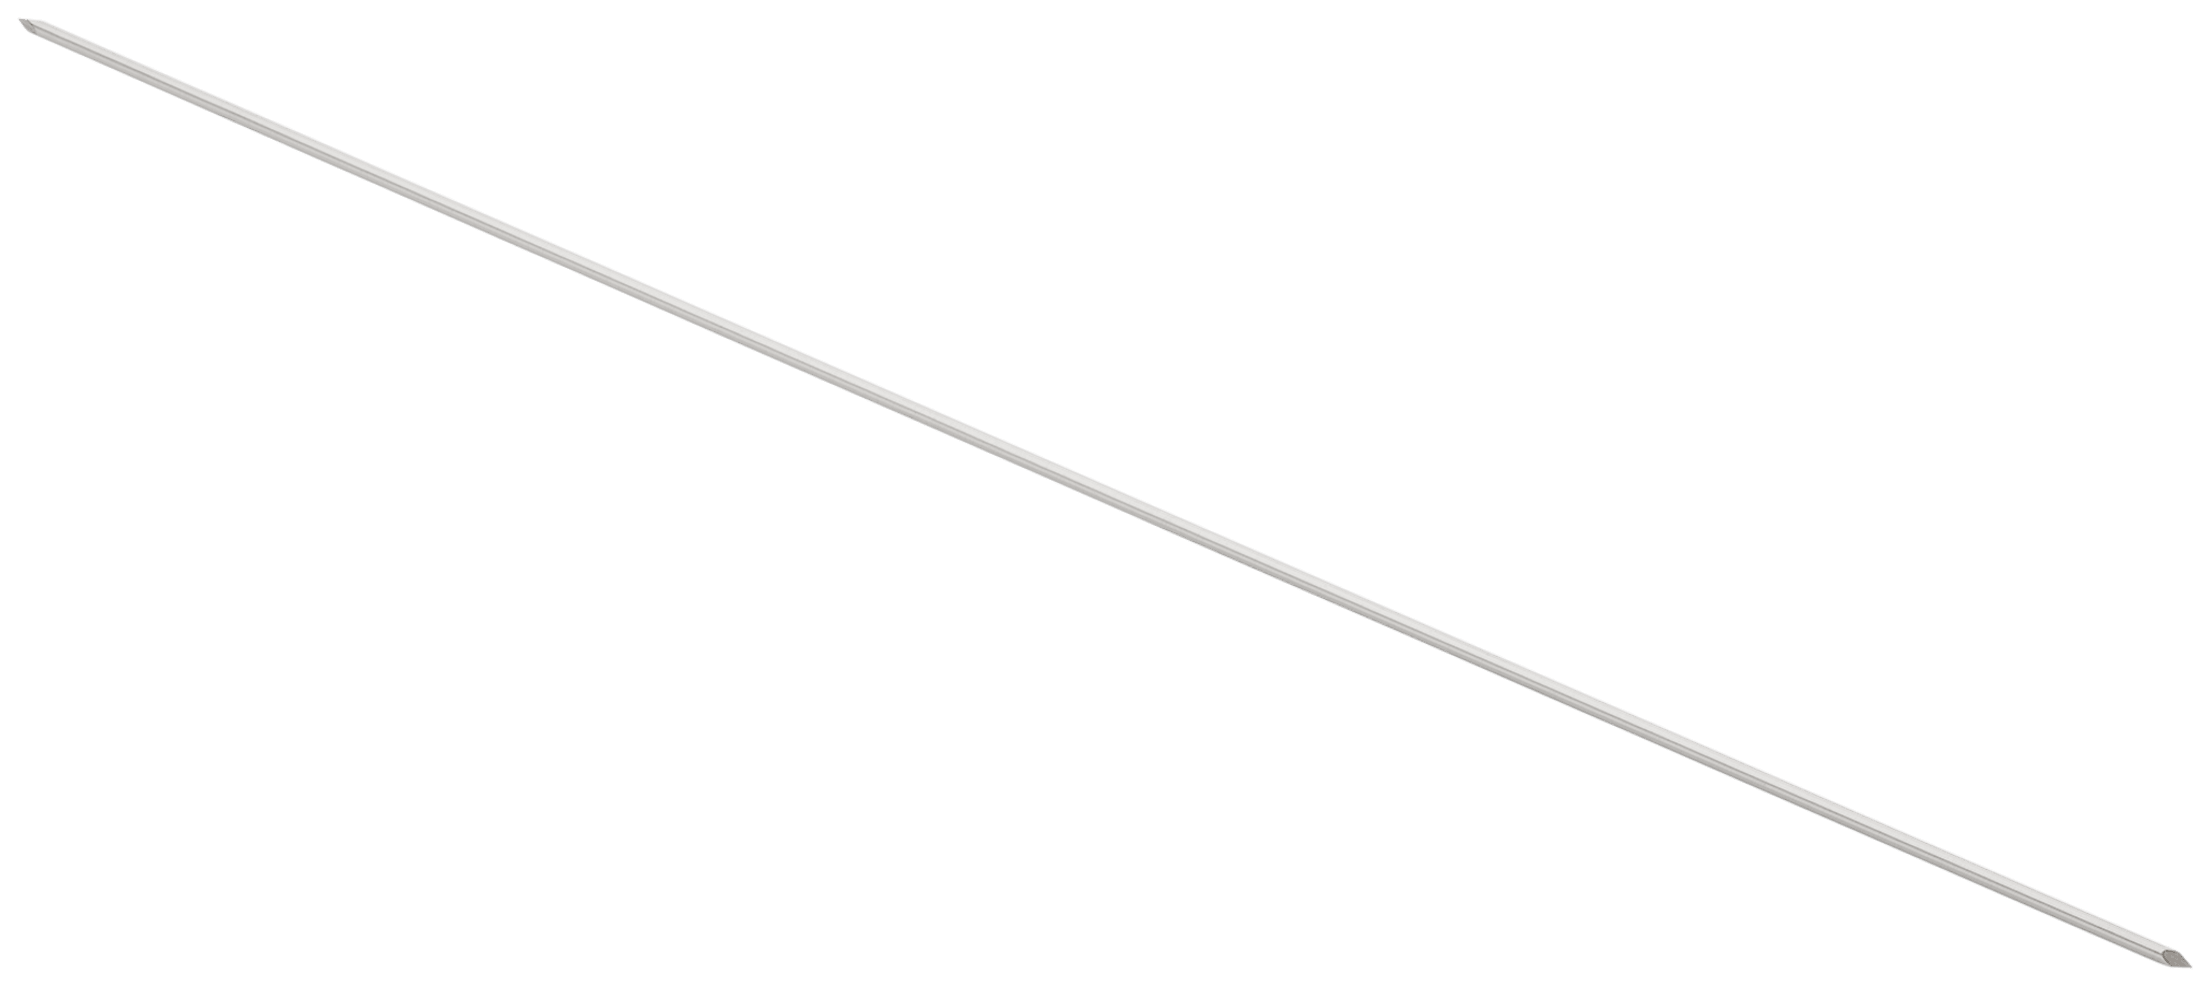 Nitinol Guidewire with Double Trocar Tip, 0.062" x 9.25" (1.6 mm x 235 mm)